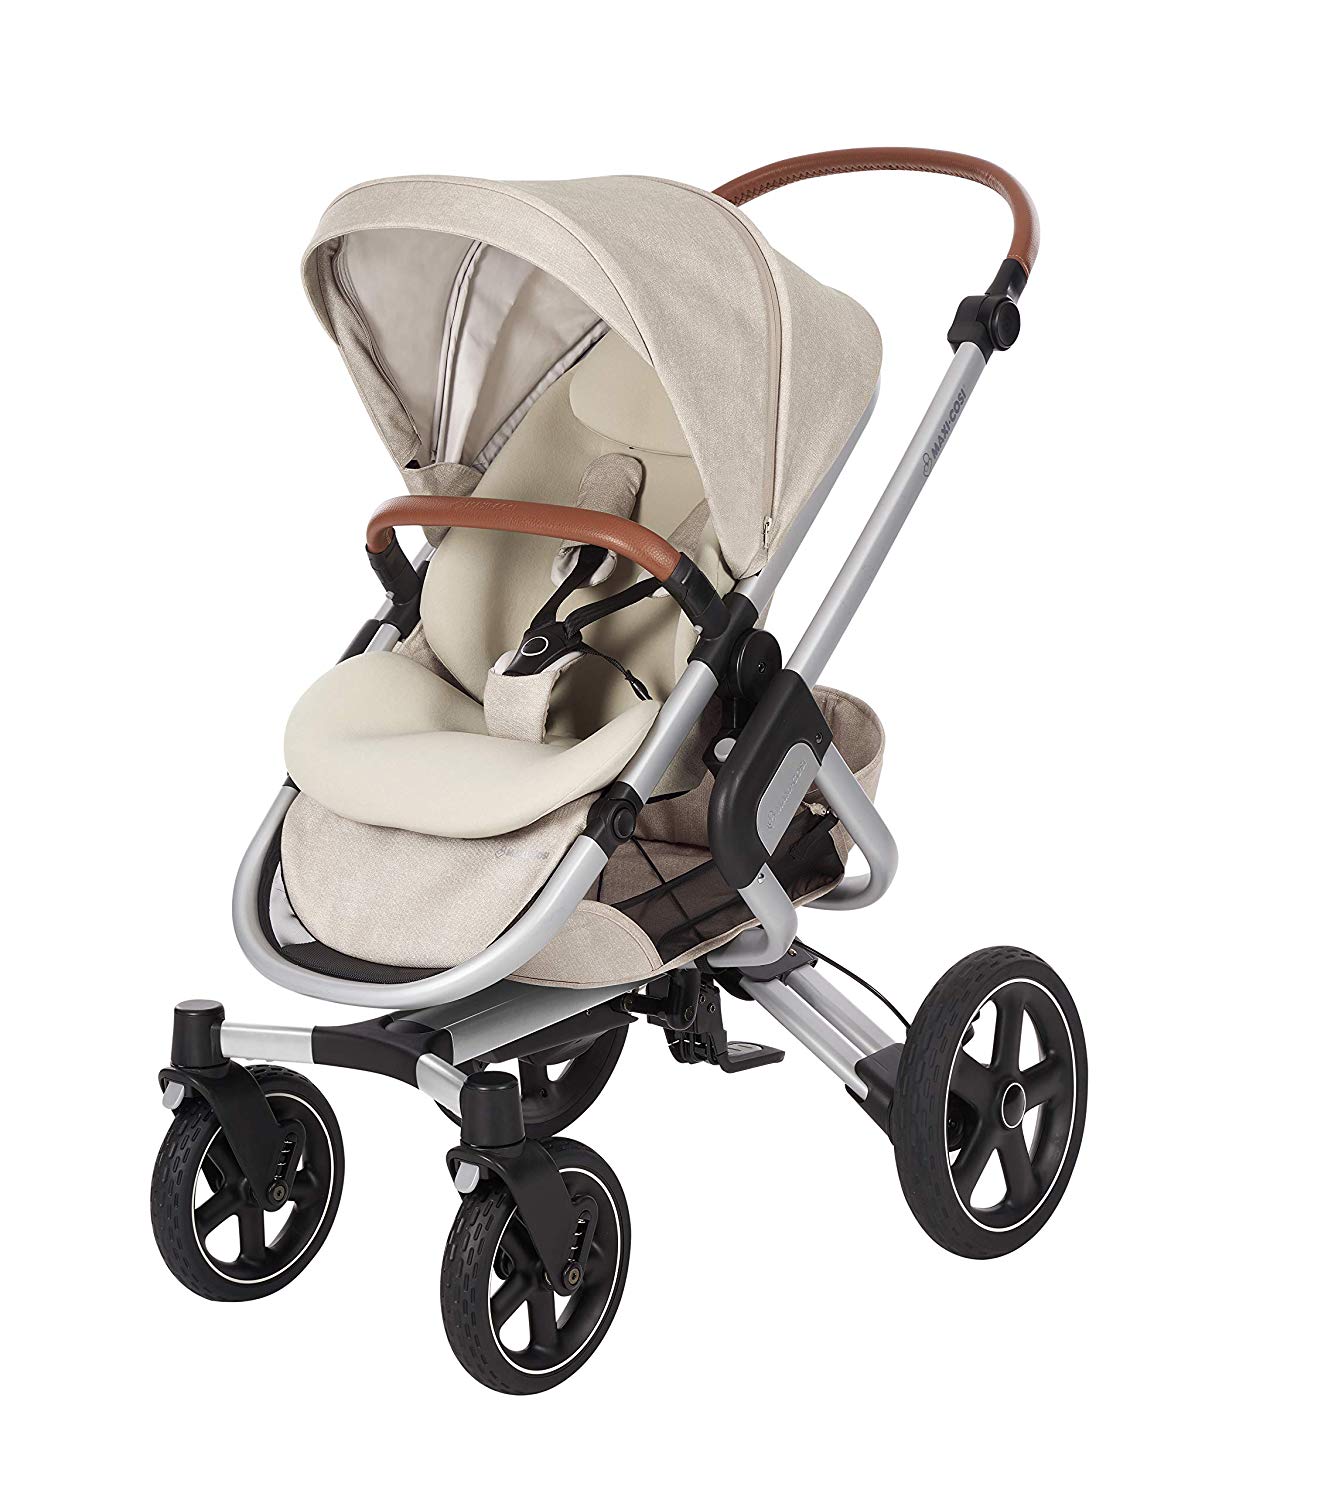 Maxi-Cosi Nova Combi-Pushchair Can Be Used From Birth to Approx. 3.5 Years, Comfortable Outdoor/Off-Road Pushchair 4 Wheels